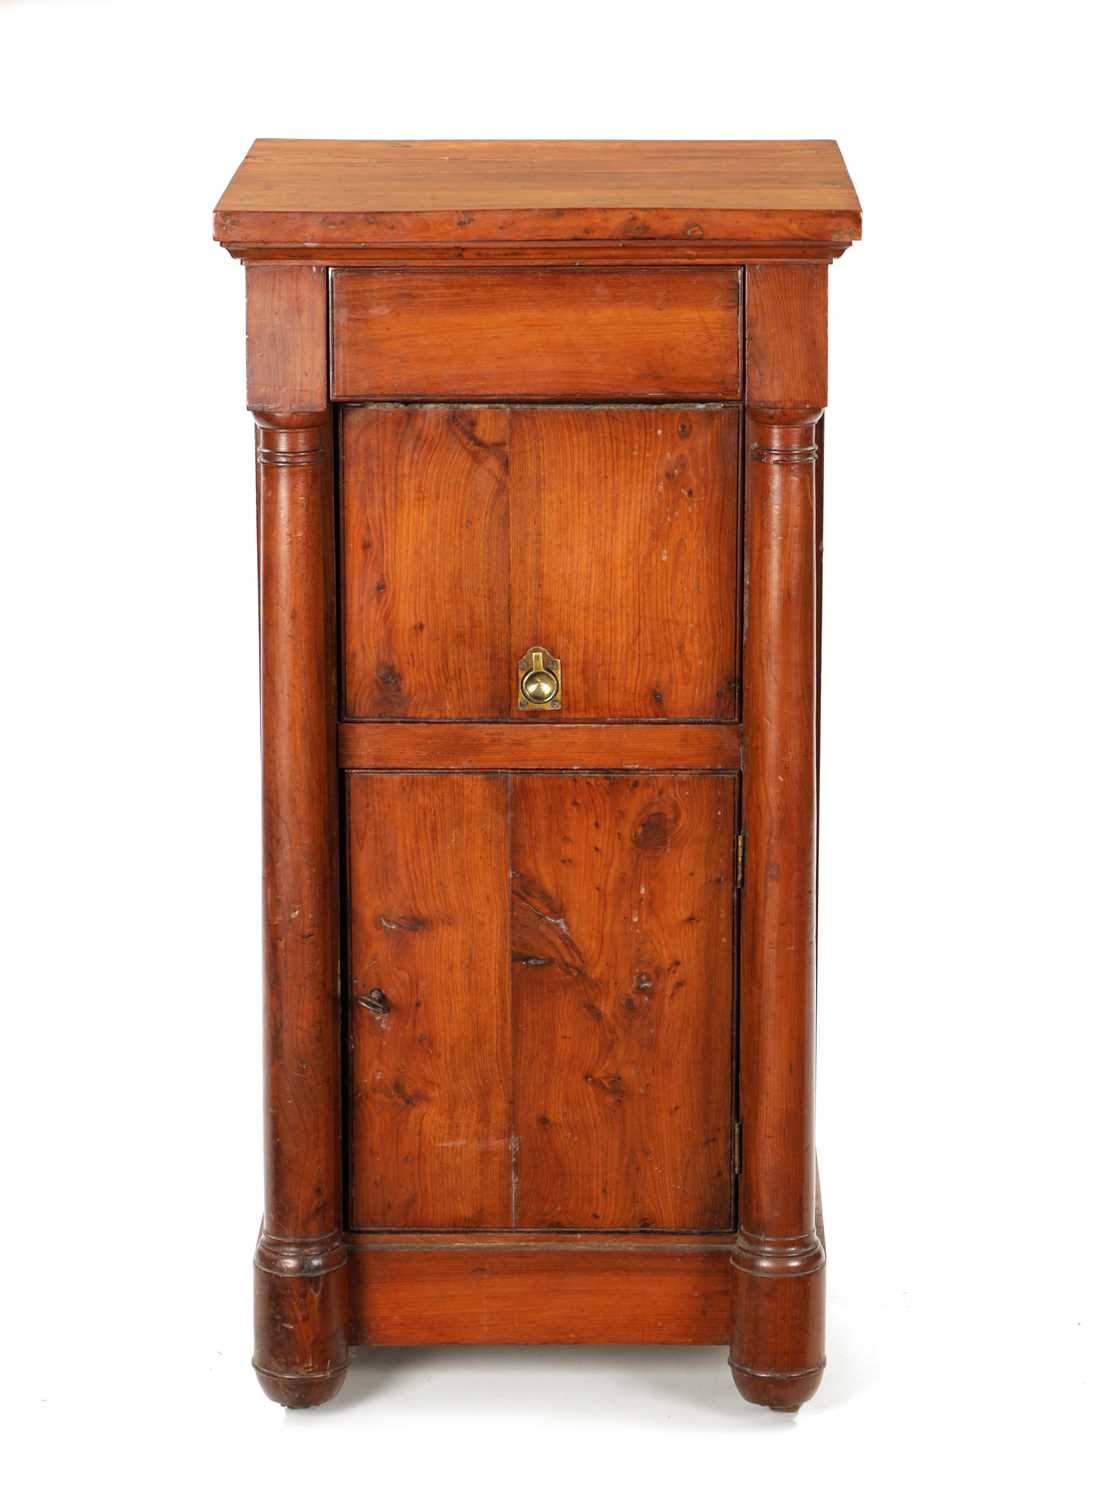 AN 18TH CENTURY EMPIRE STYLE YEW-WOOD BEDSIDE CABINET